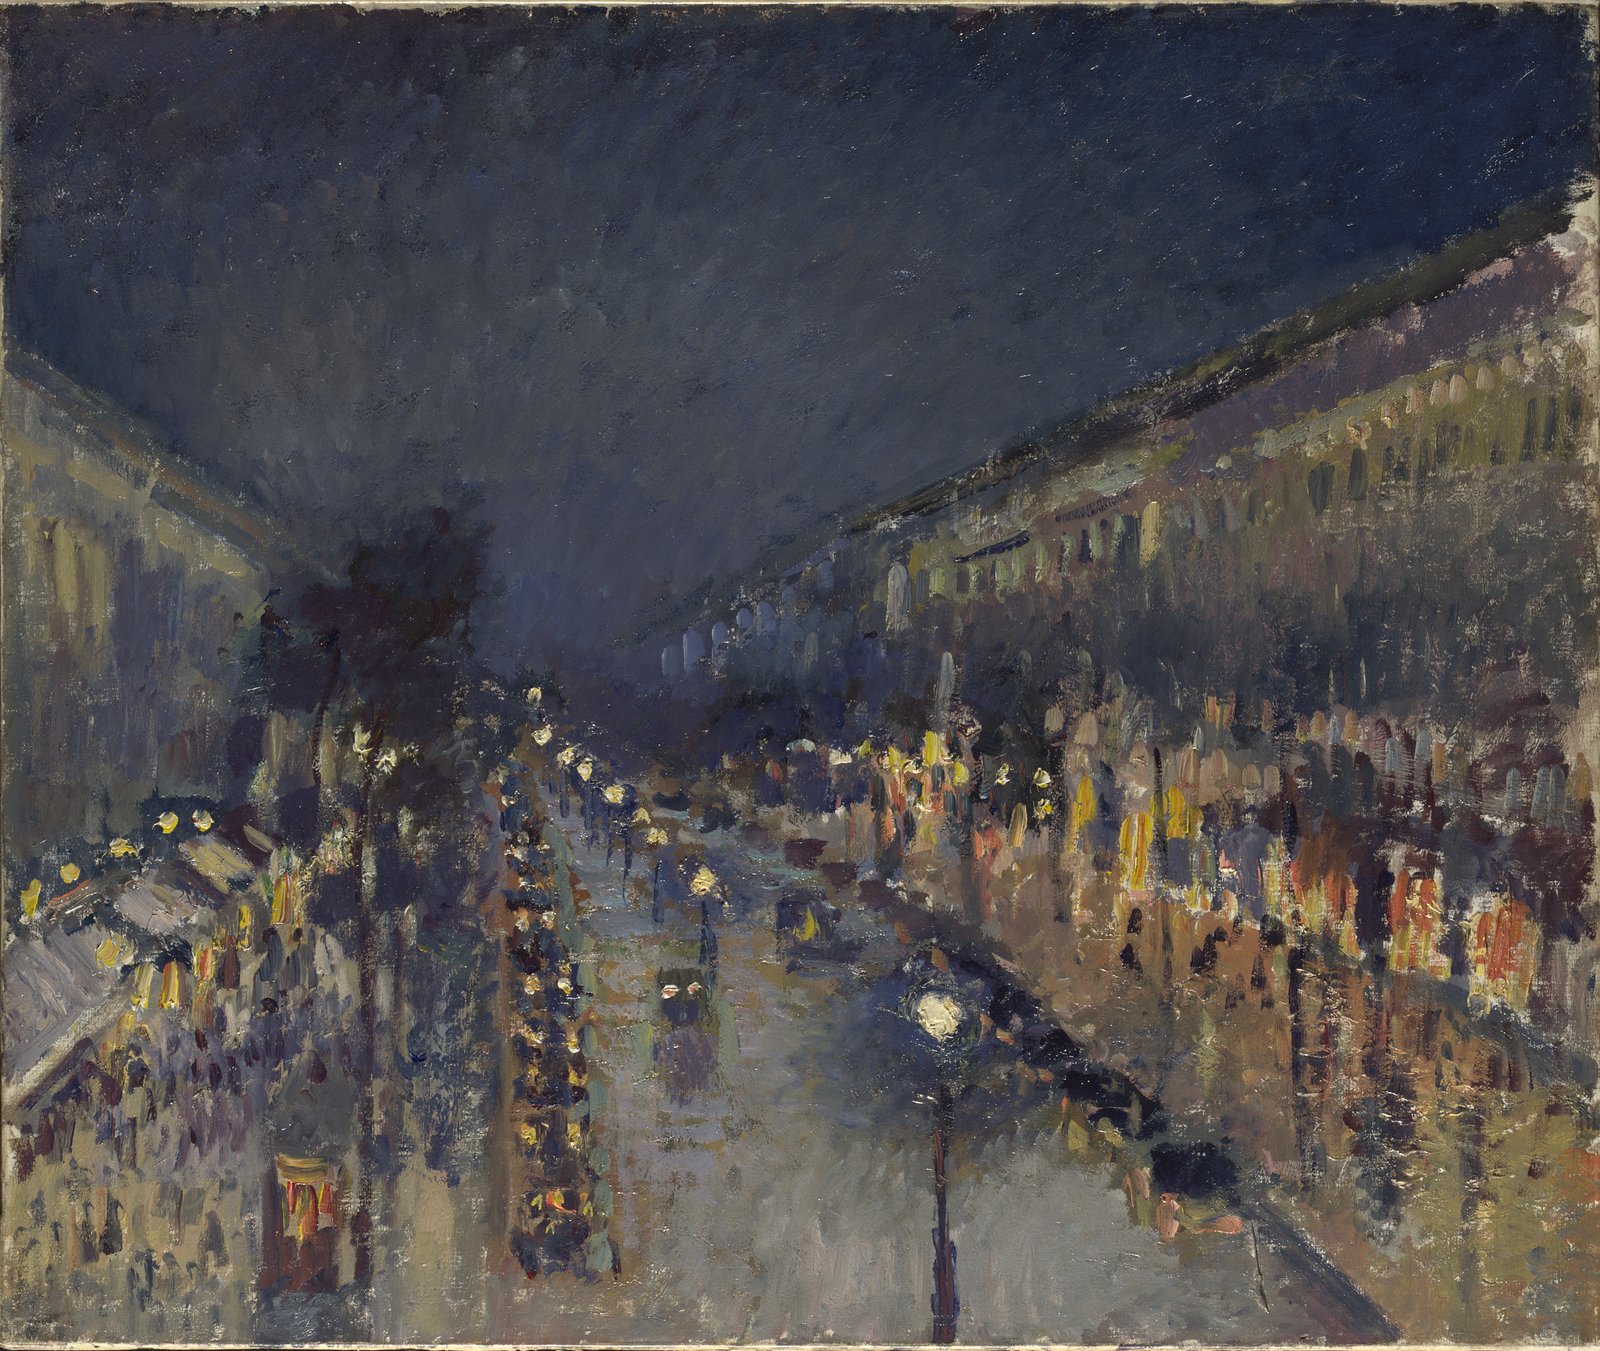 The Boulevard Montmartre at Night - Camille Pissarro, 1897